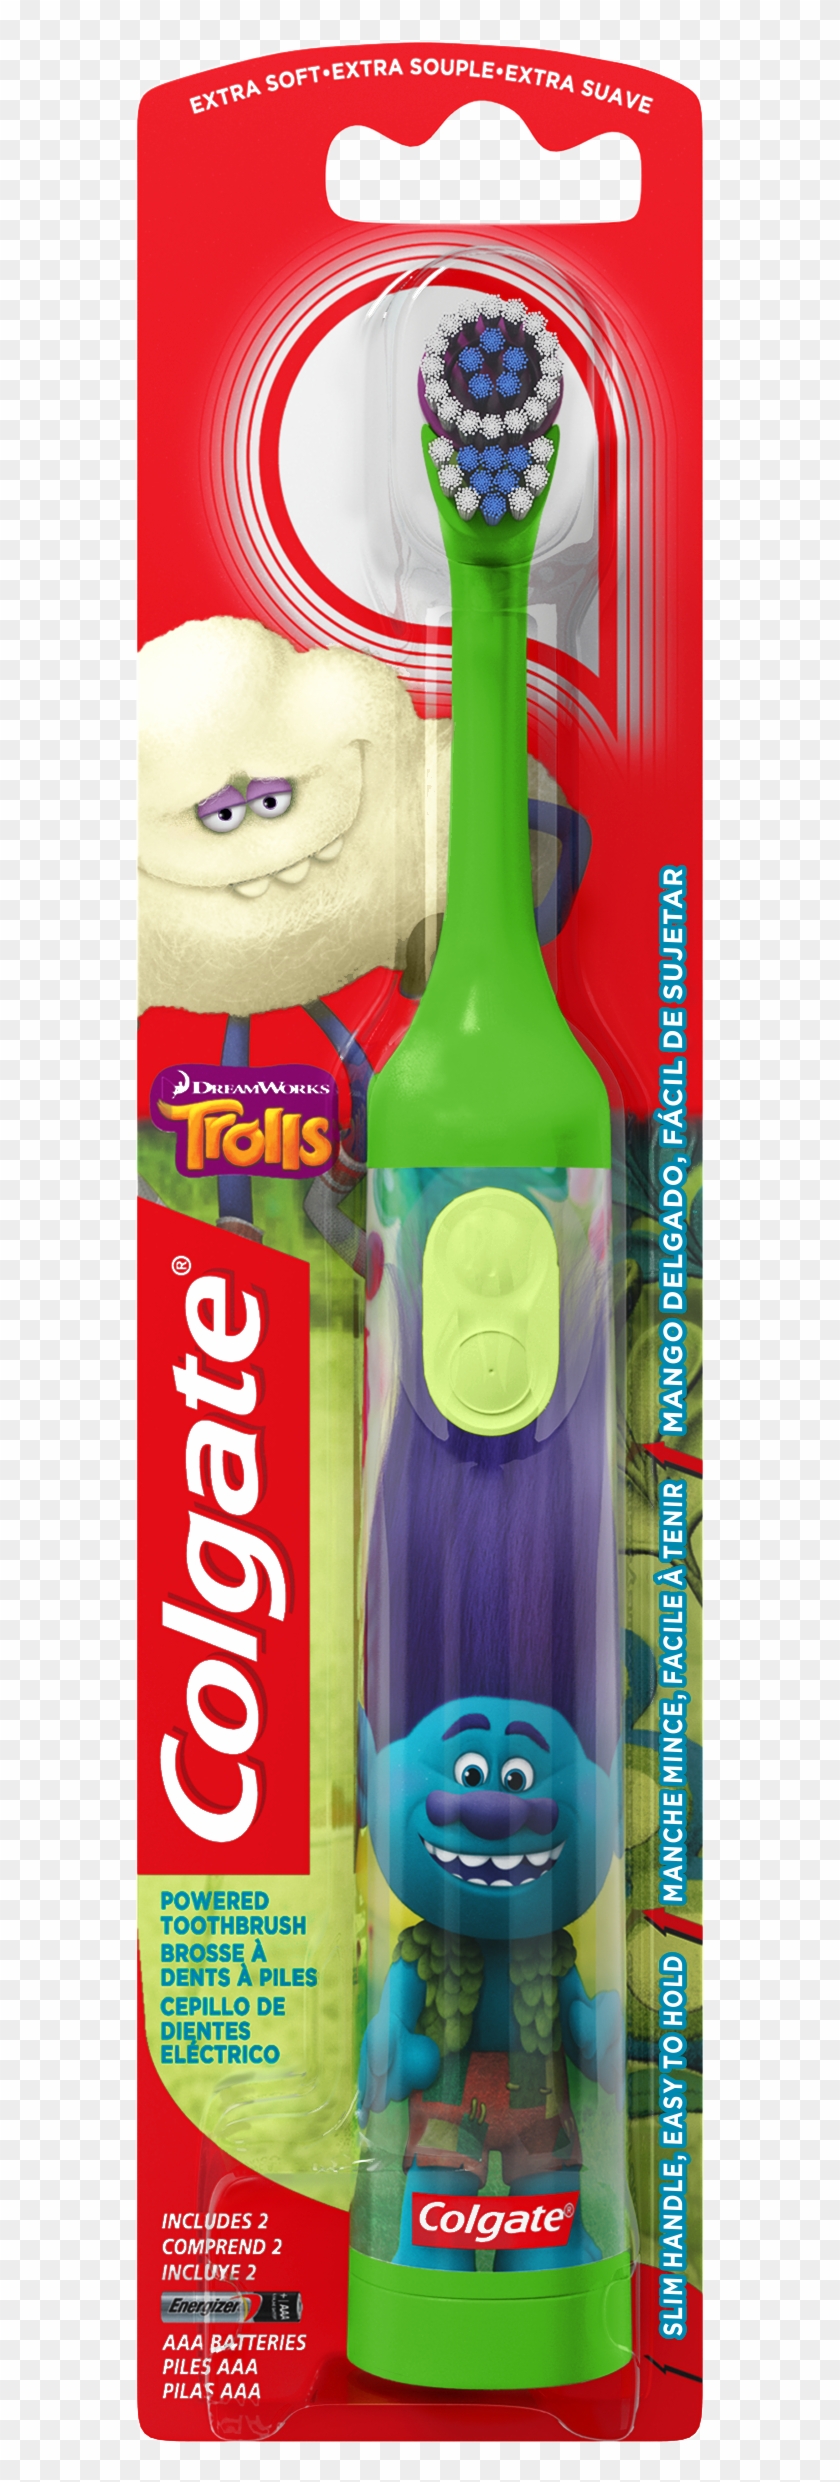 Colgate Kids Battery Powered Toothbrush - Colgate Toothbrush For Kids Clipart #573125